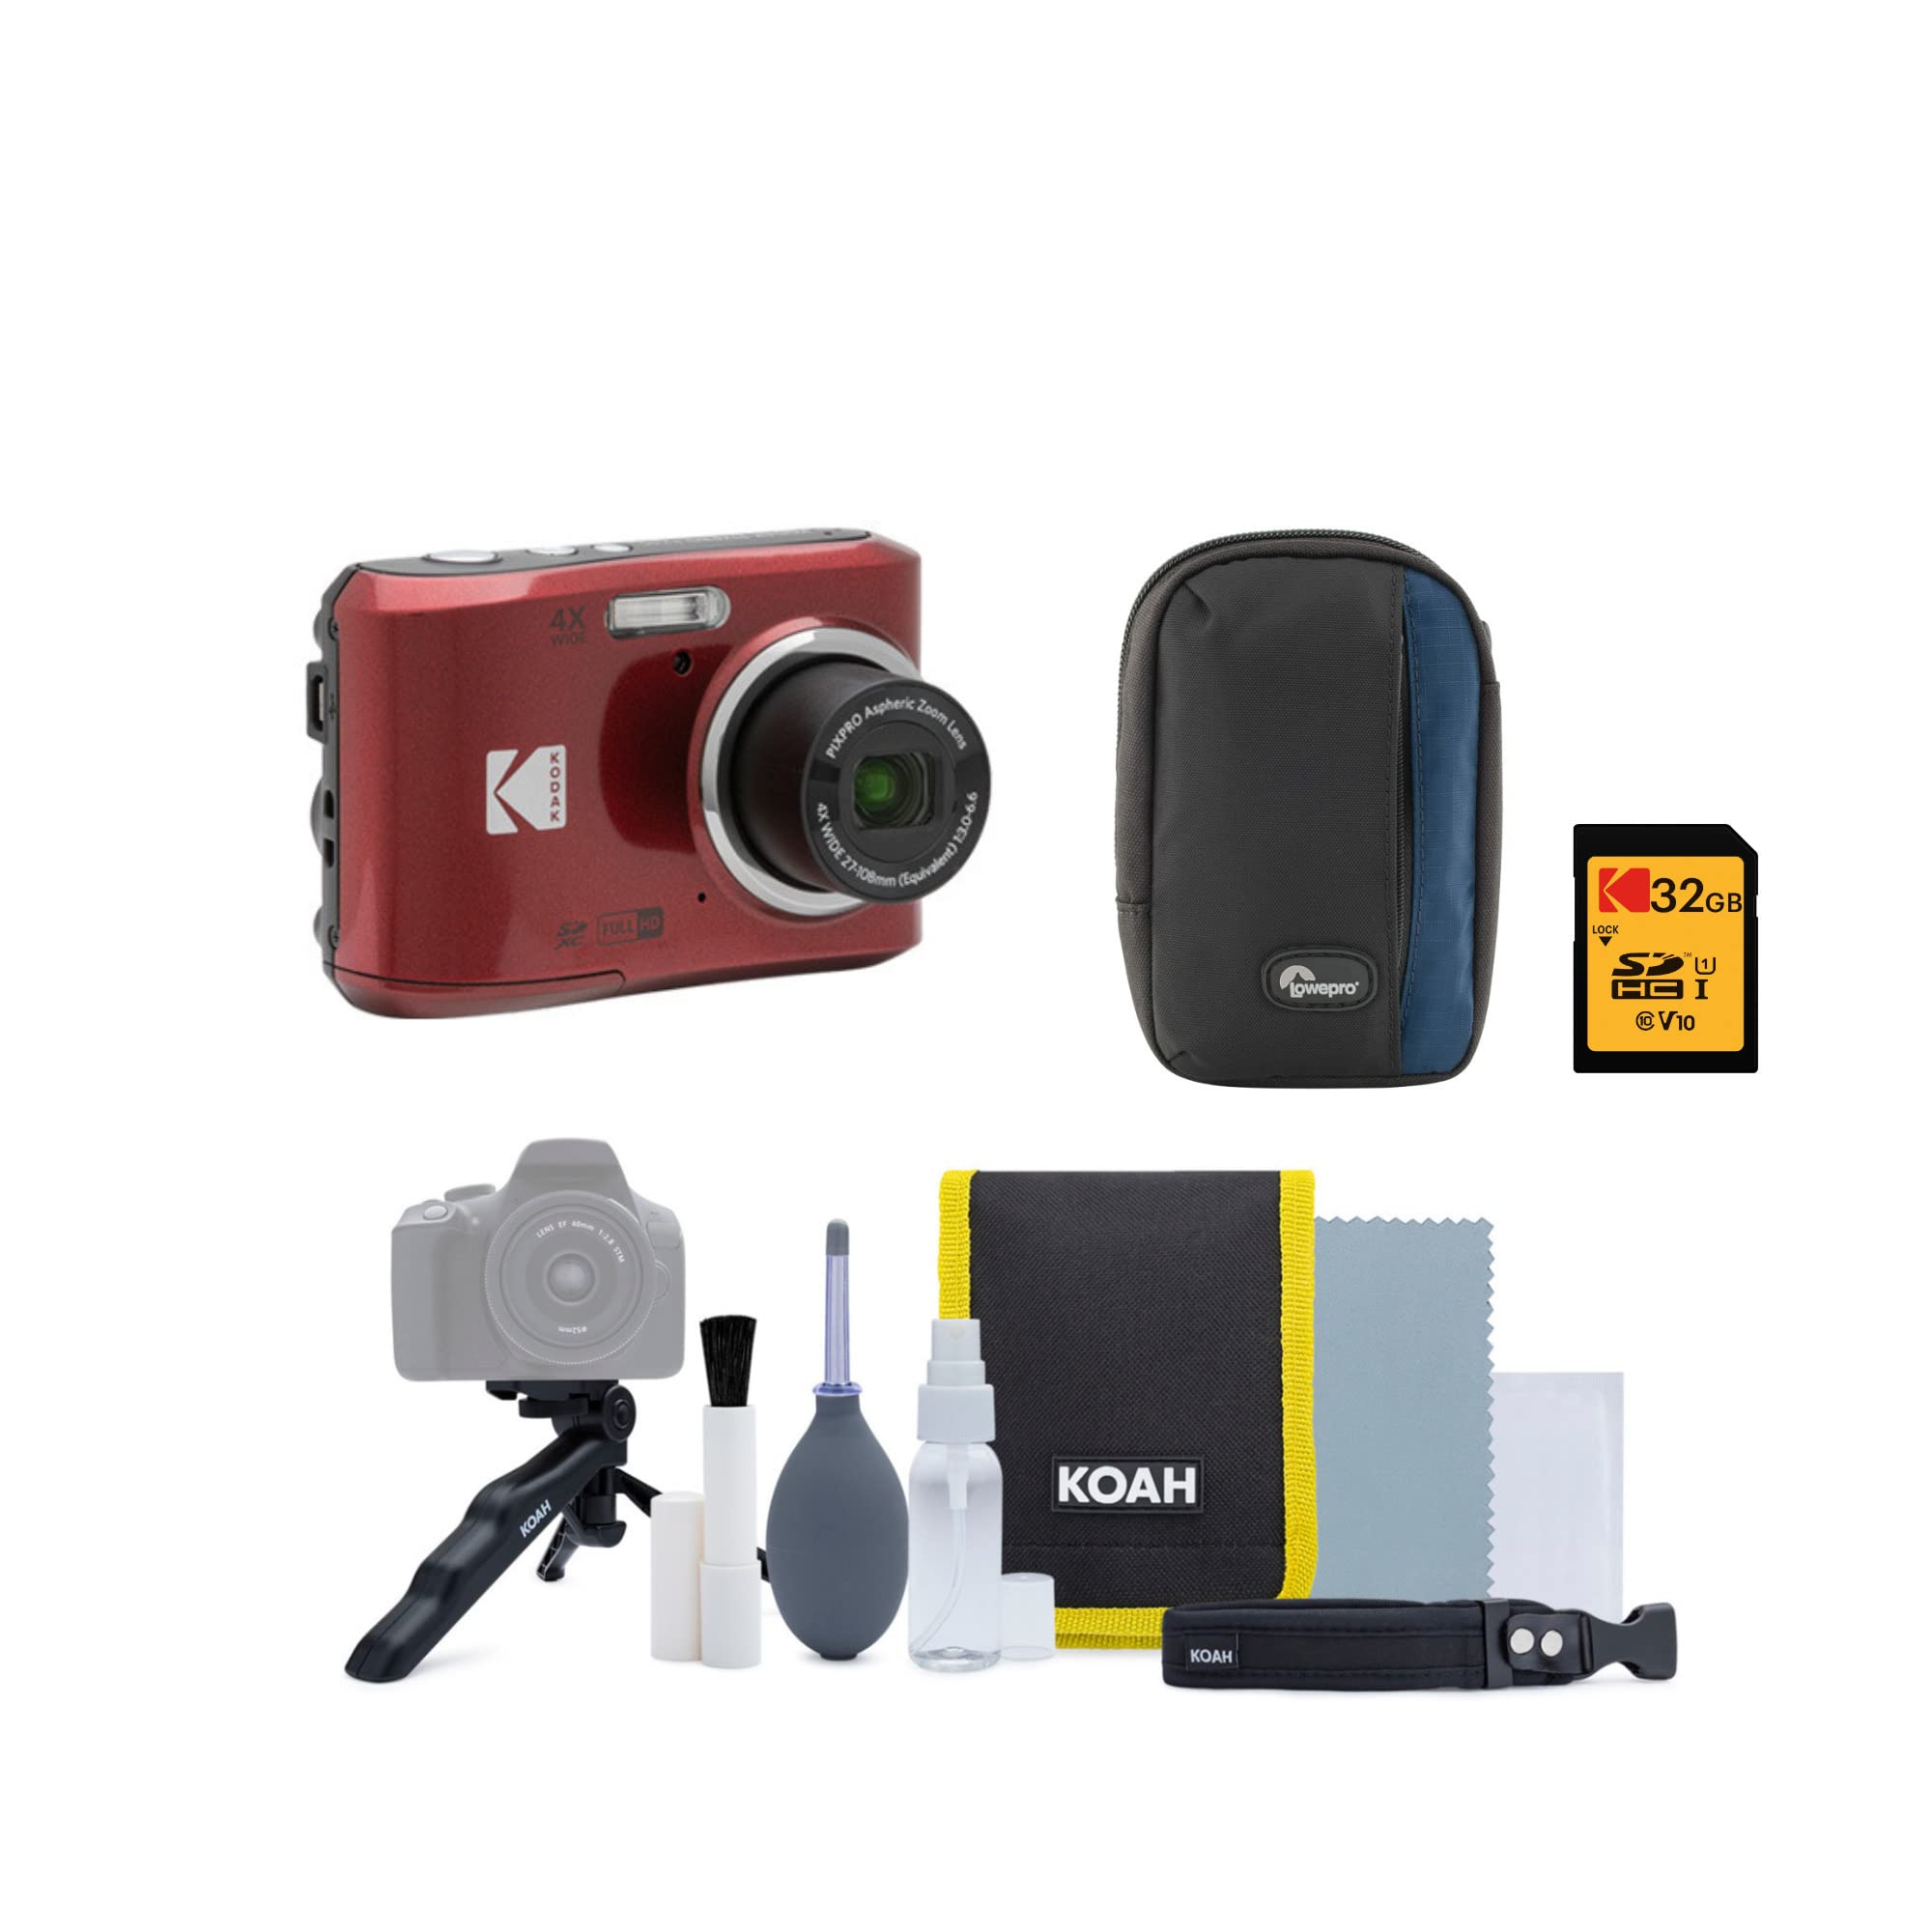 KODAK PIXPRO Friendly Zoom FZ45-WH 16MP Digital Camera with 4X Optical Zoom 27mm Wide Angle and 2.7' LCD Screen (Red) Bundle with Cleaning Kit, 32GB Memory Card, Camera Case, and Batteries (5 Items)